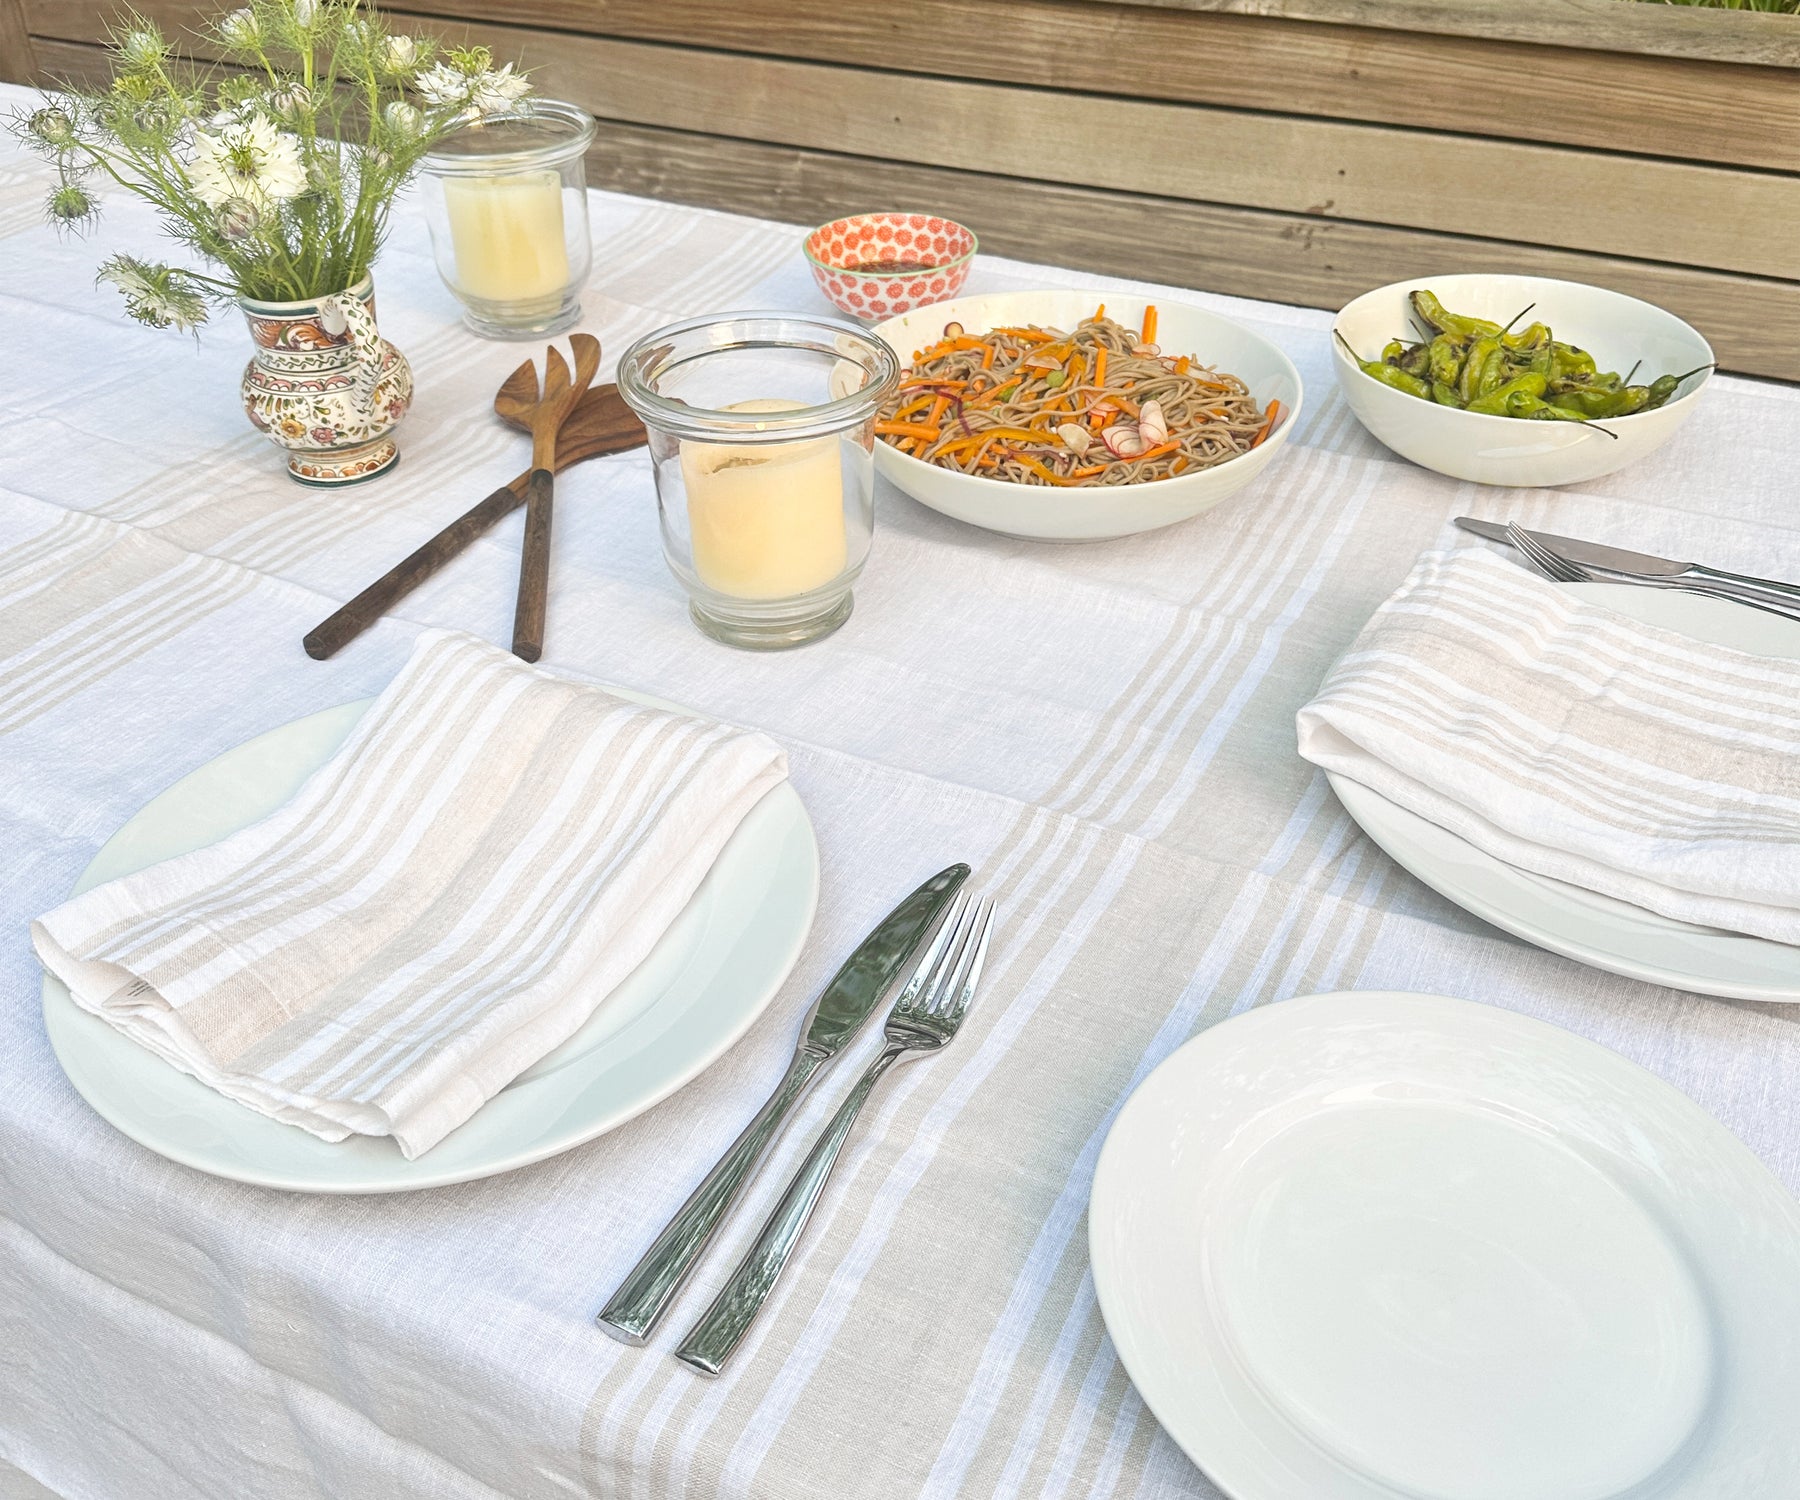 Formal dining table set with a luxurious white linen tablecloth